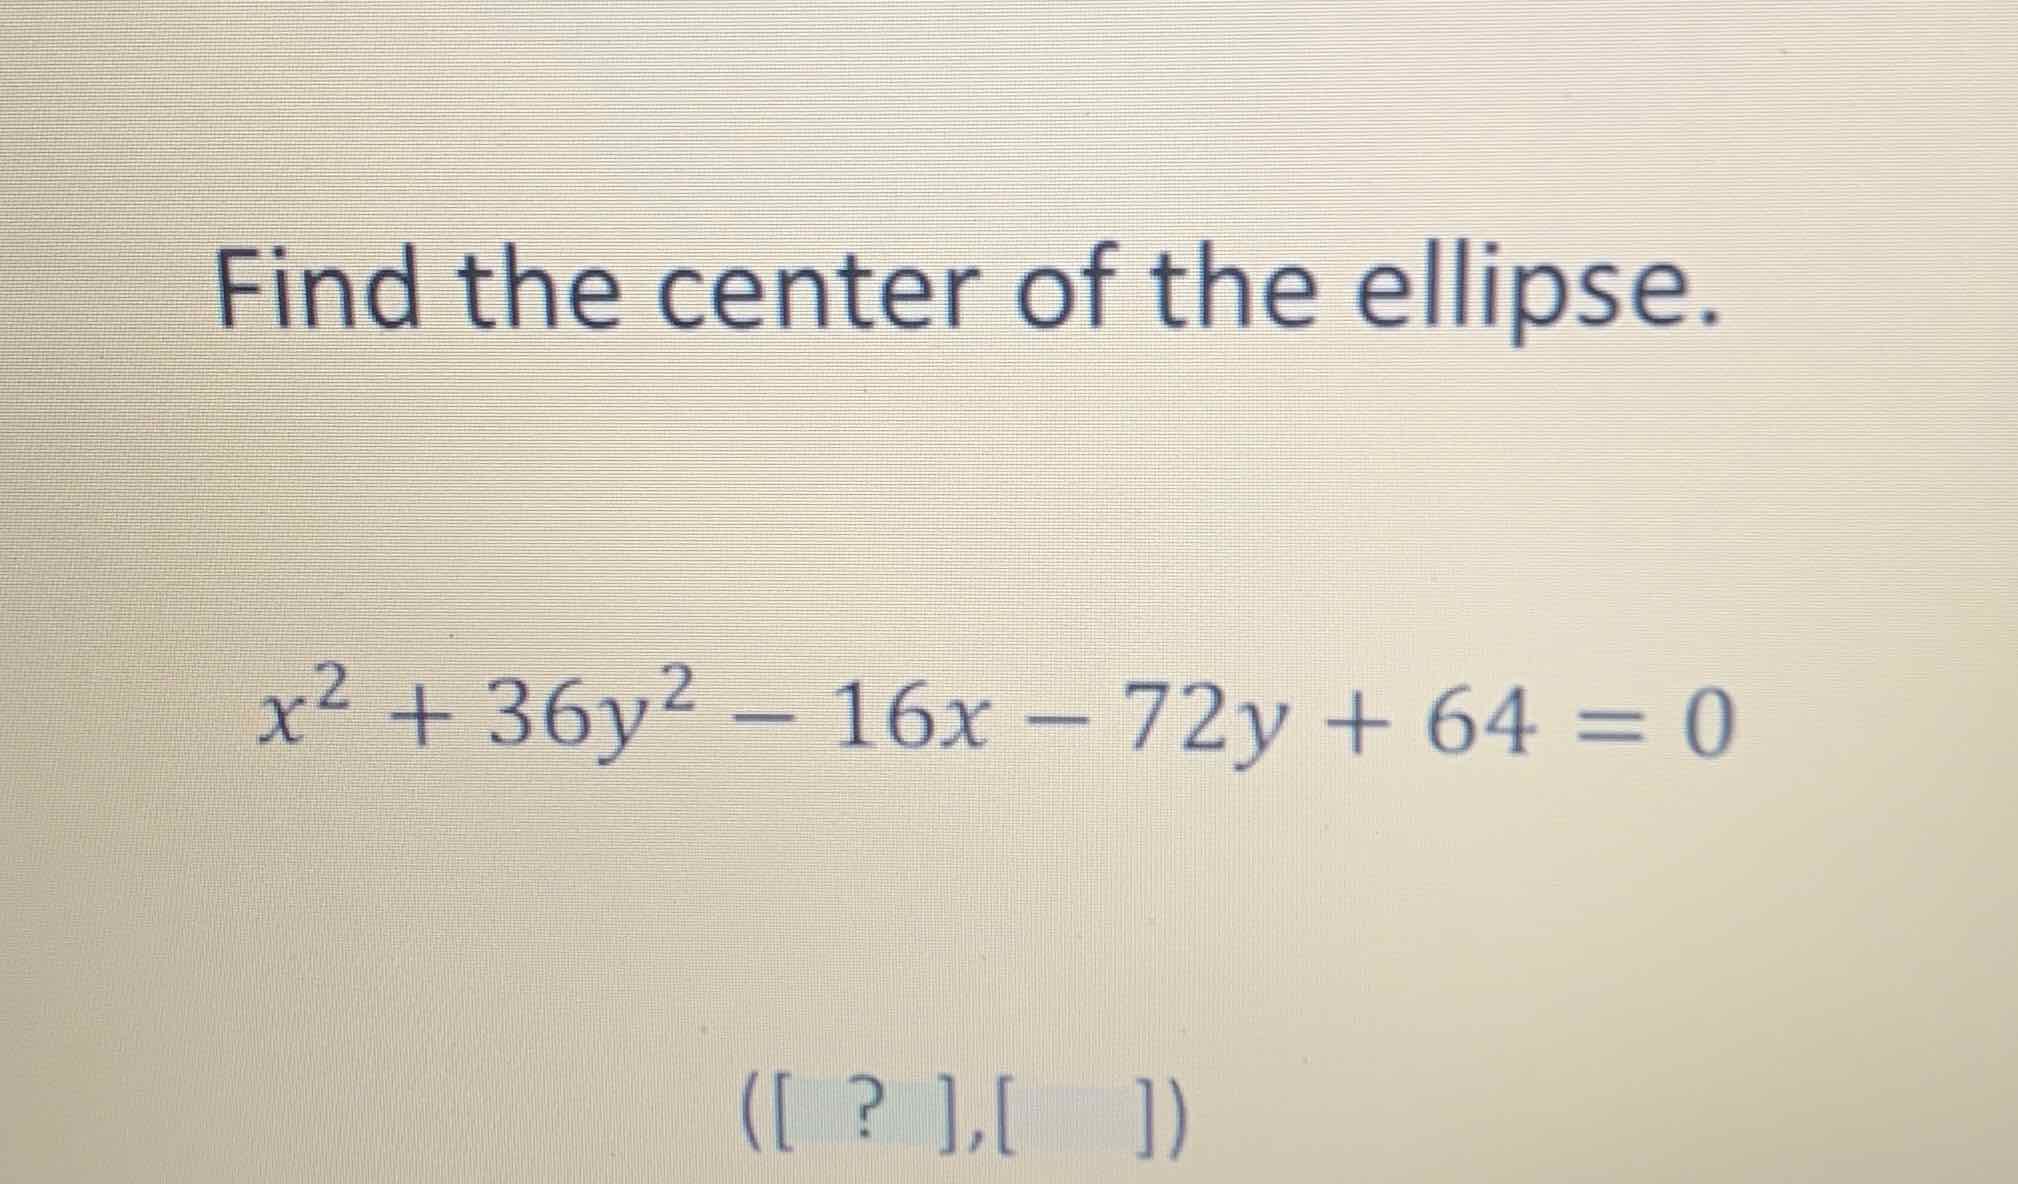 Find the center of the ellipse.
\[
x^{2}+36 y^{2}-16 x-72 y+64=0
\]